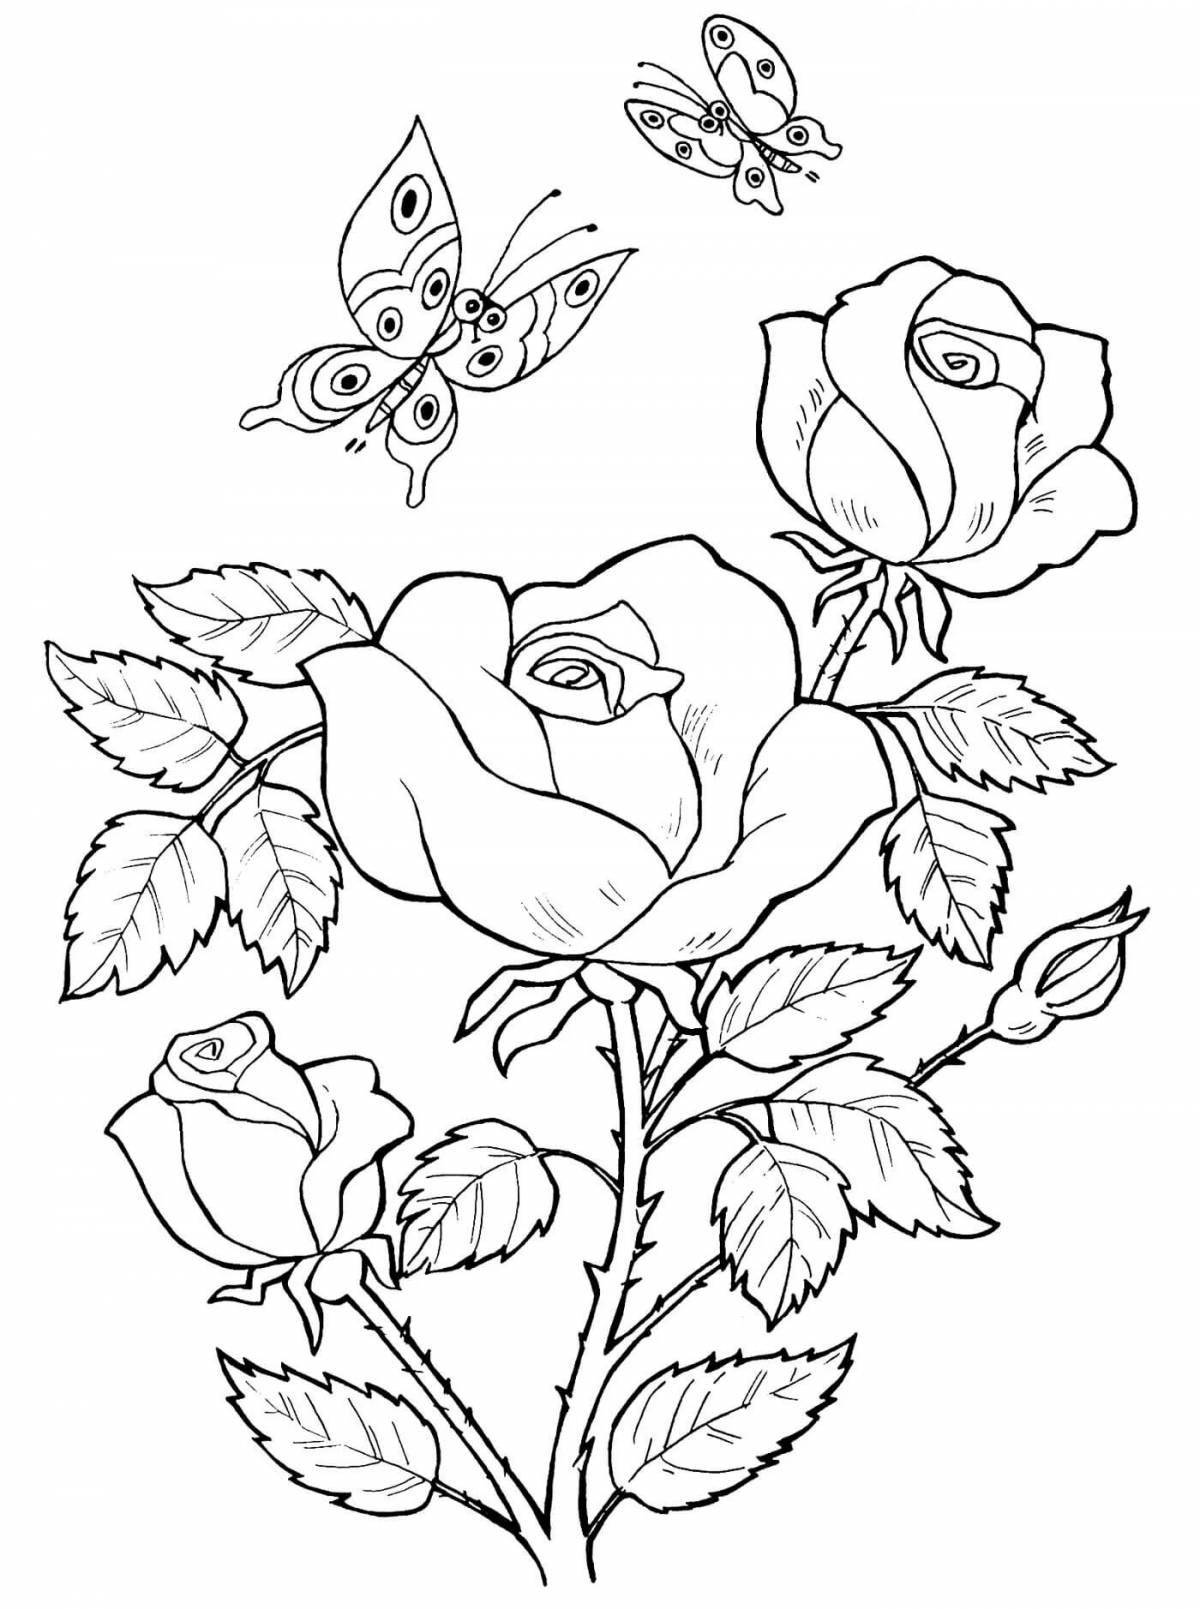 Adorable rose coloring for girls